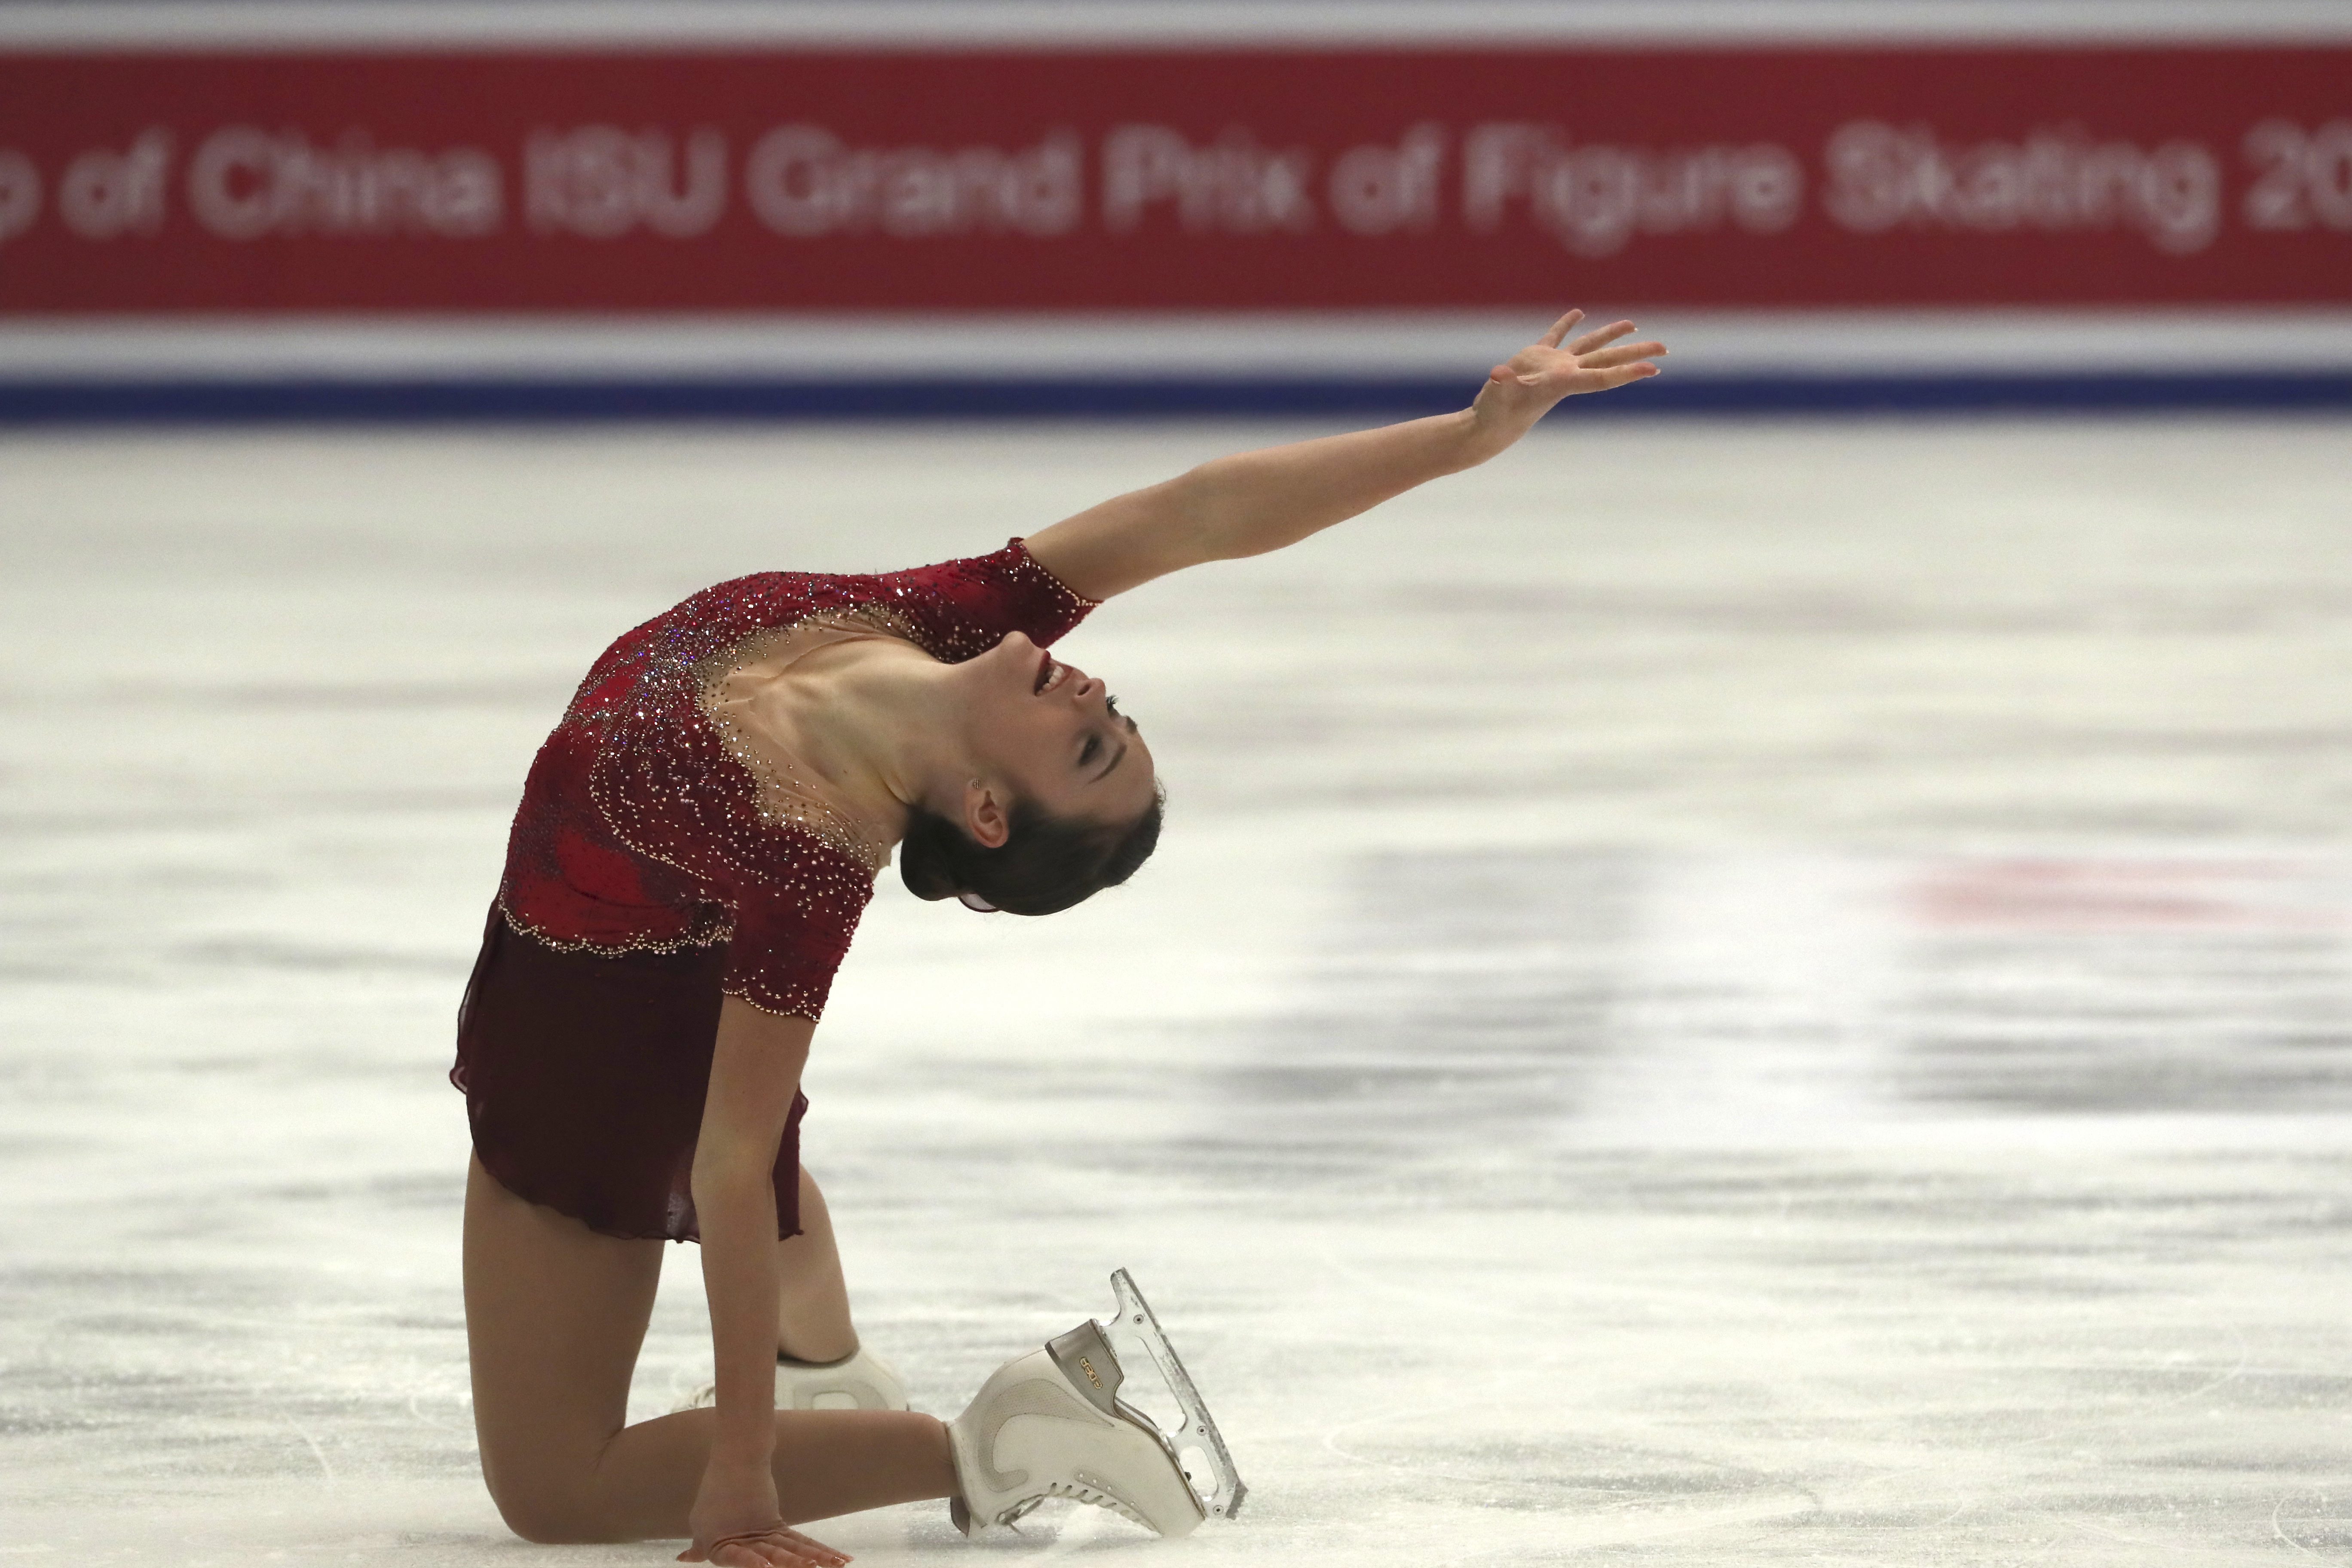 Kaetlyn Osmond of Canada competes in the Ladies Free Skating for the Audi Cup of China ISU Grand Prix of Figure Skating 2016 held in the Capital Gymnasium in Beijing, China, Saturday, Nov. 19, 2016. Osmond finished second overall. (AP Photo/Ng Han Guan)